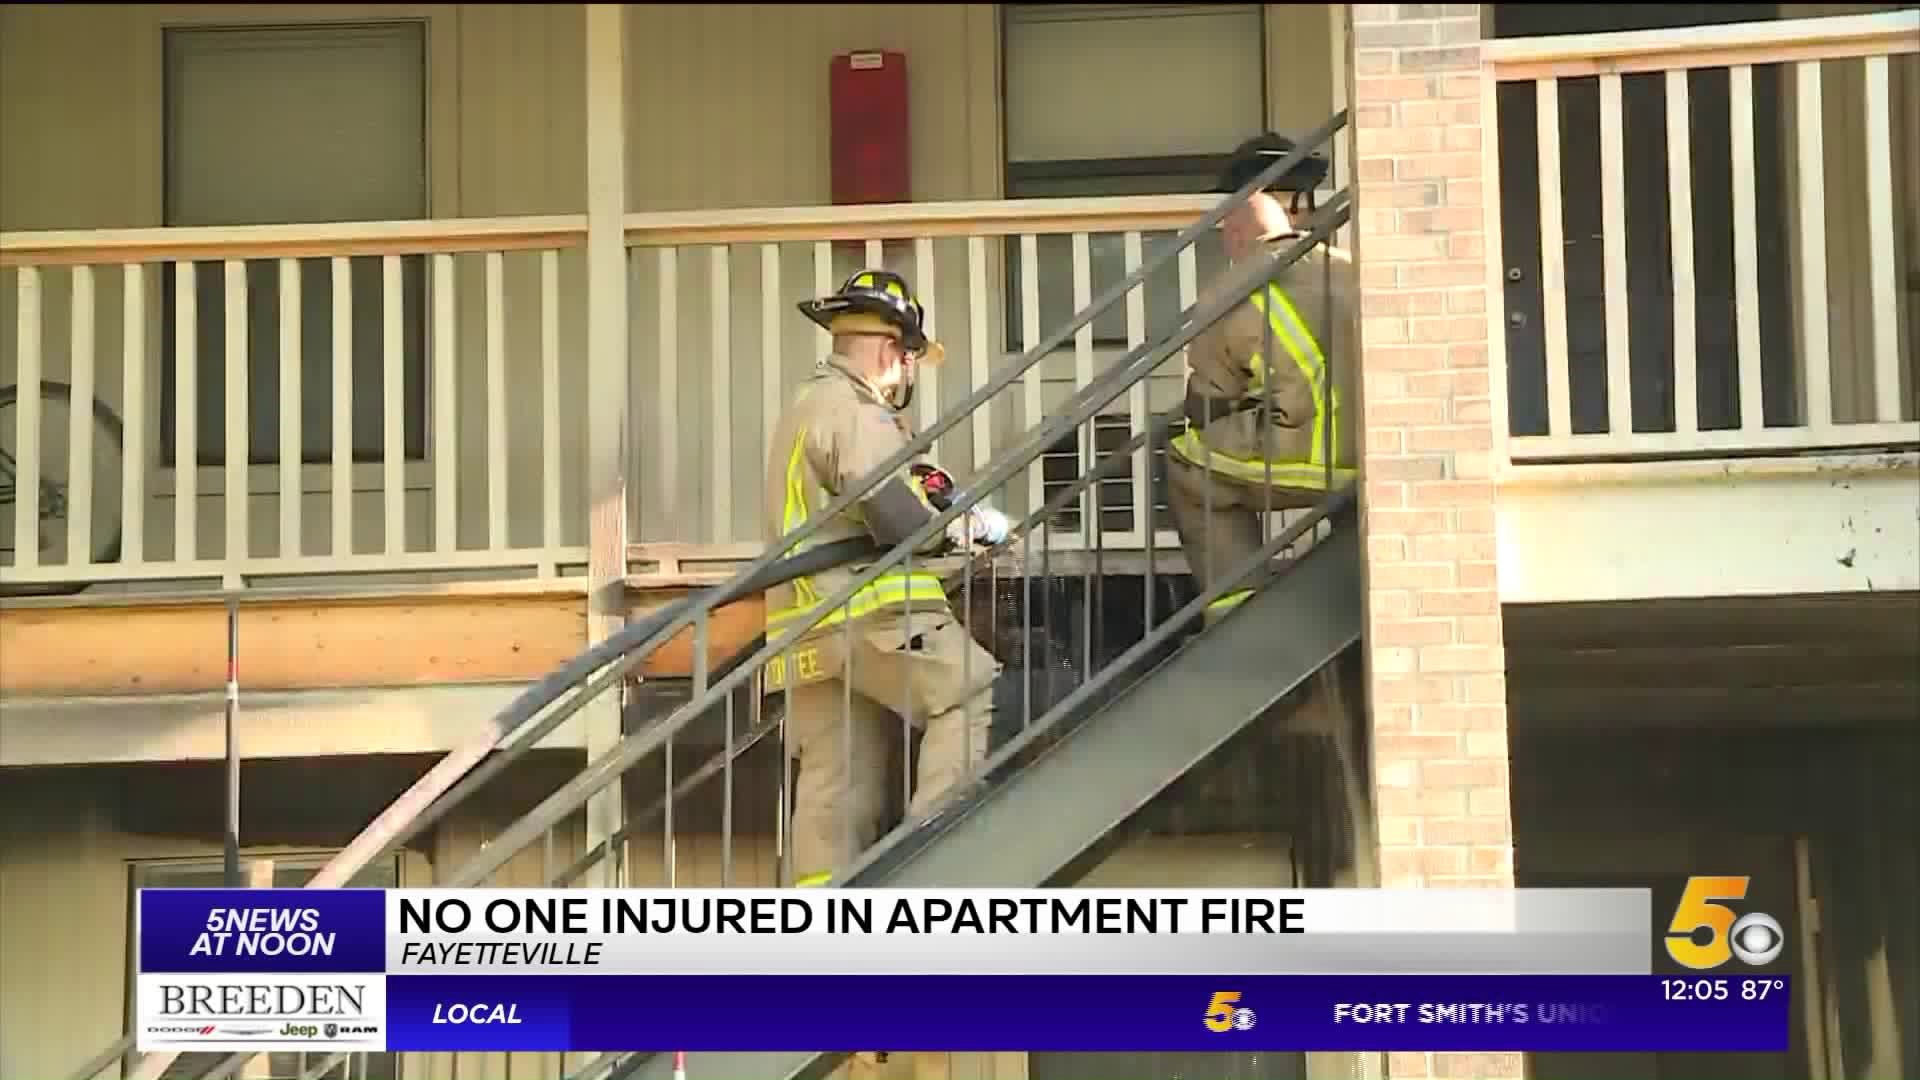 Fire at Fayetteville`s Appleby Apartments